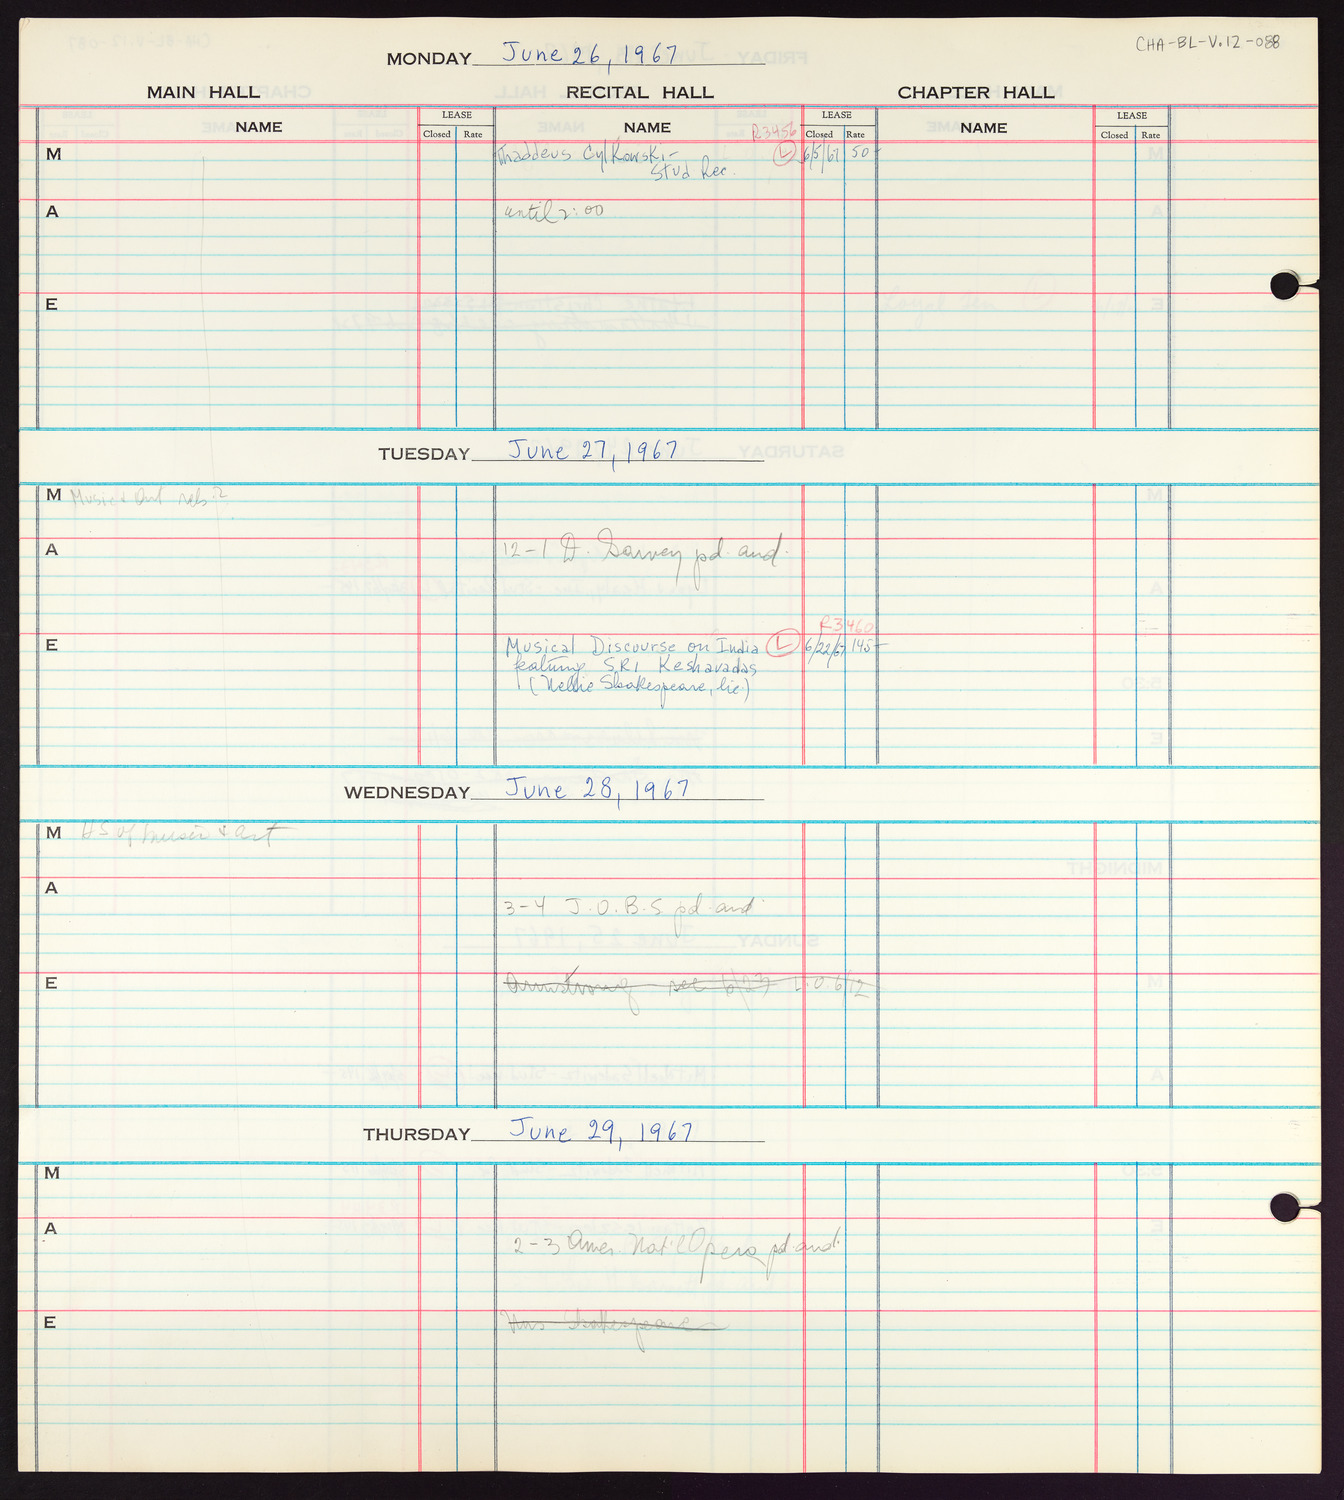 Carnegie Hall Booking Ledger, volume 12, page 88